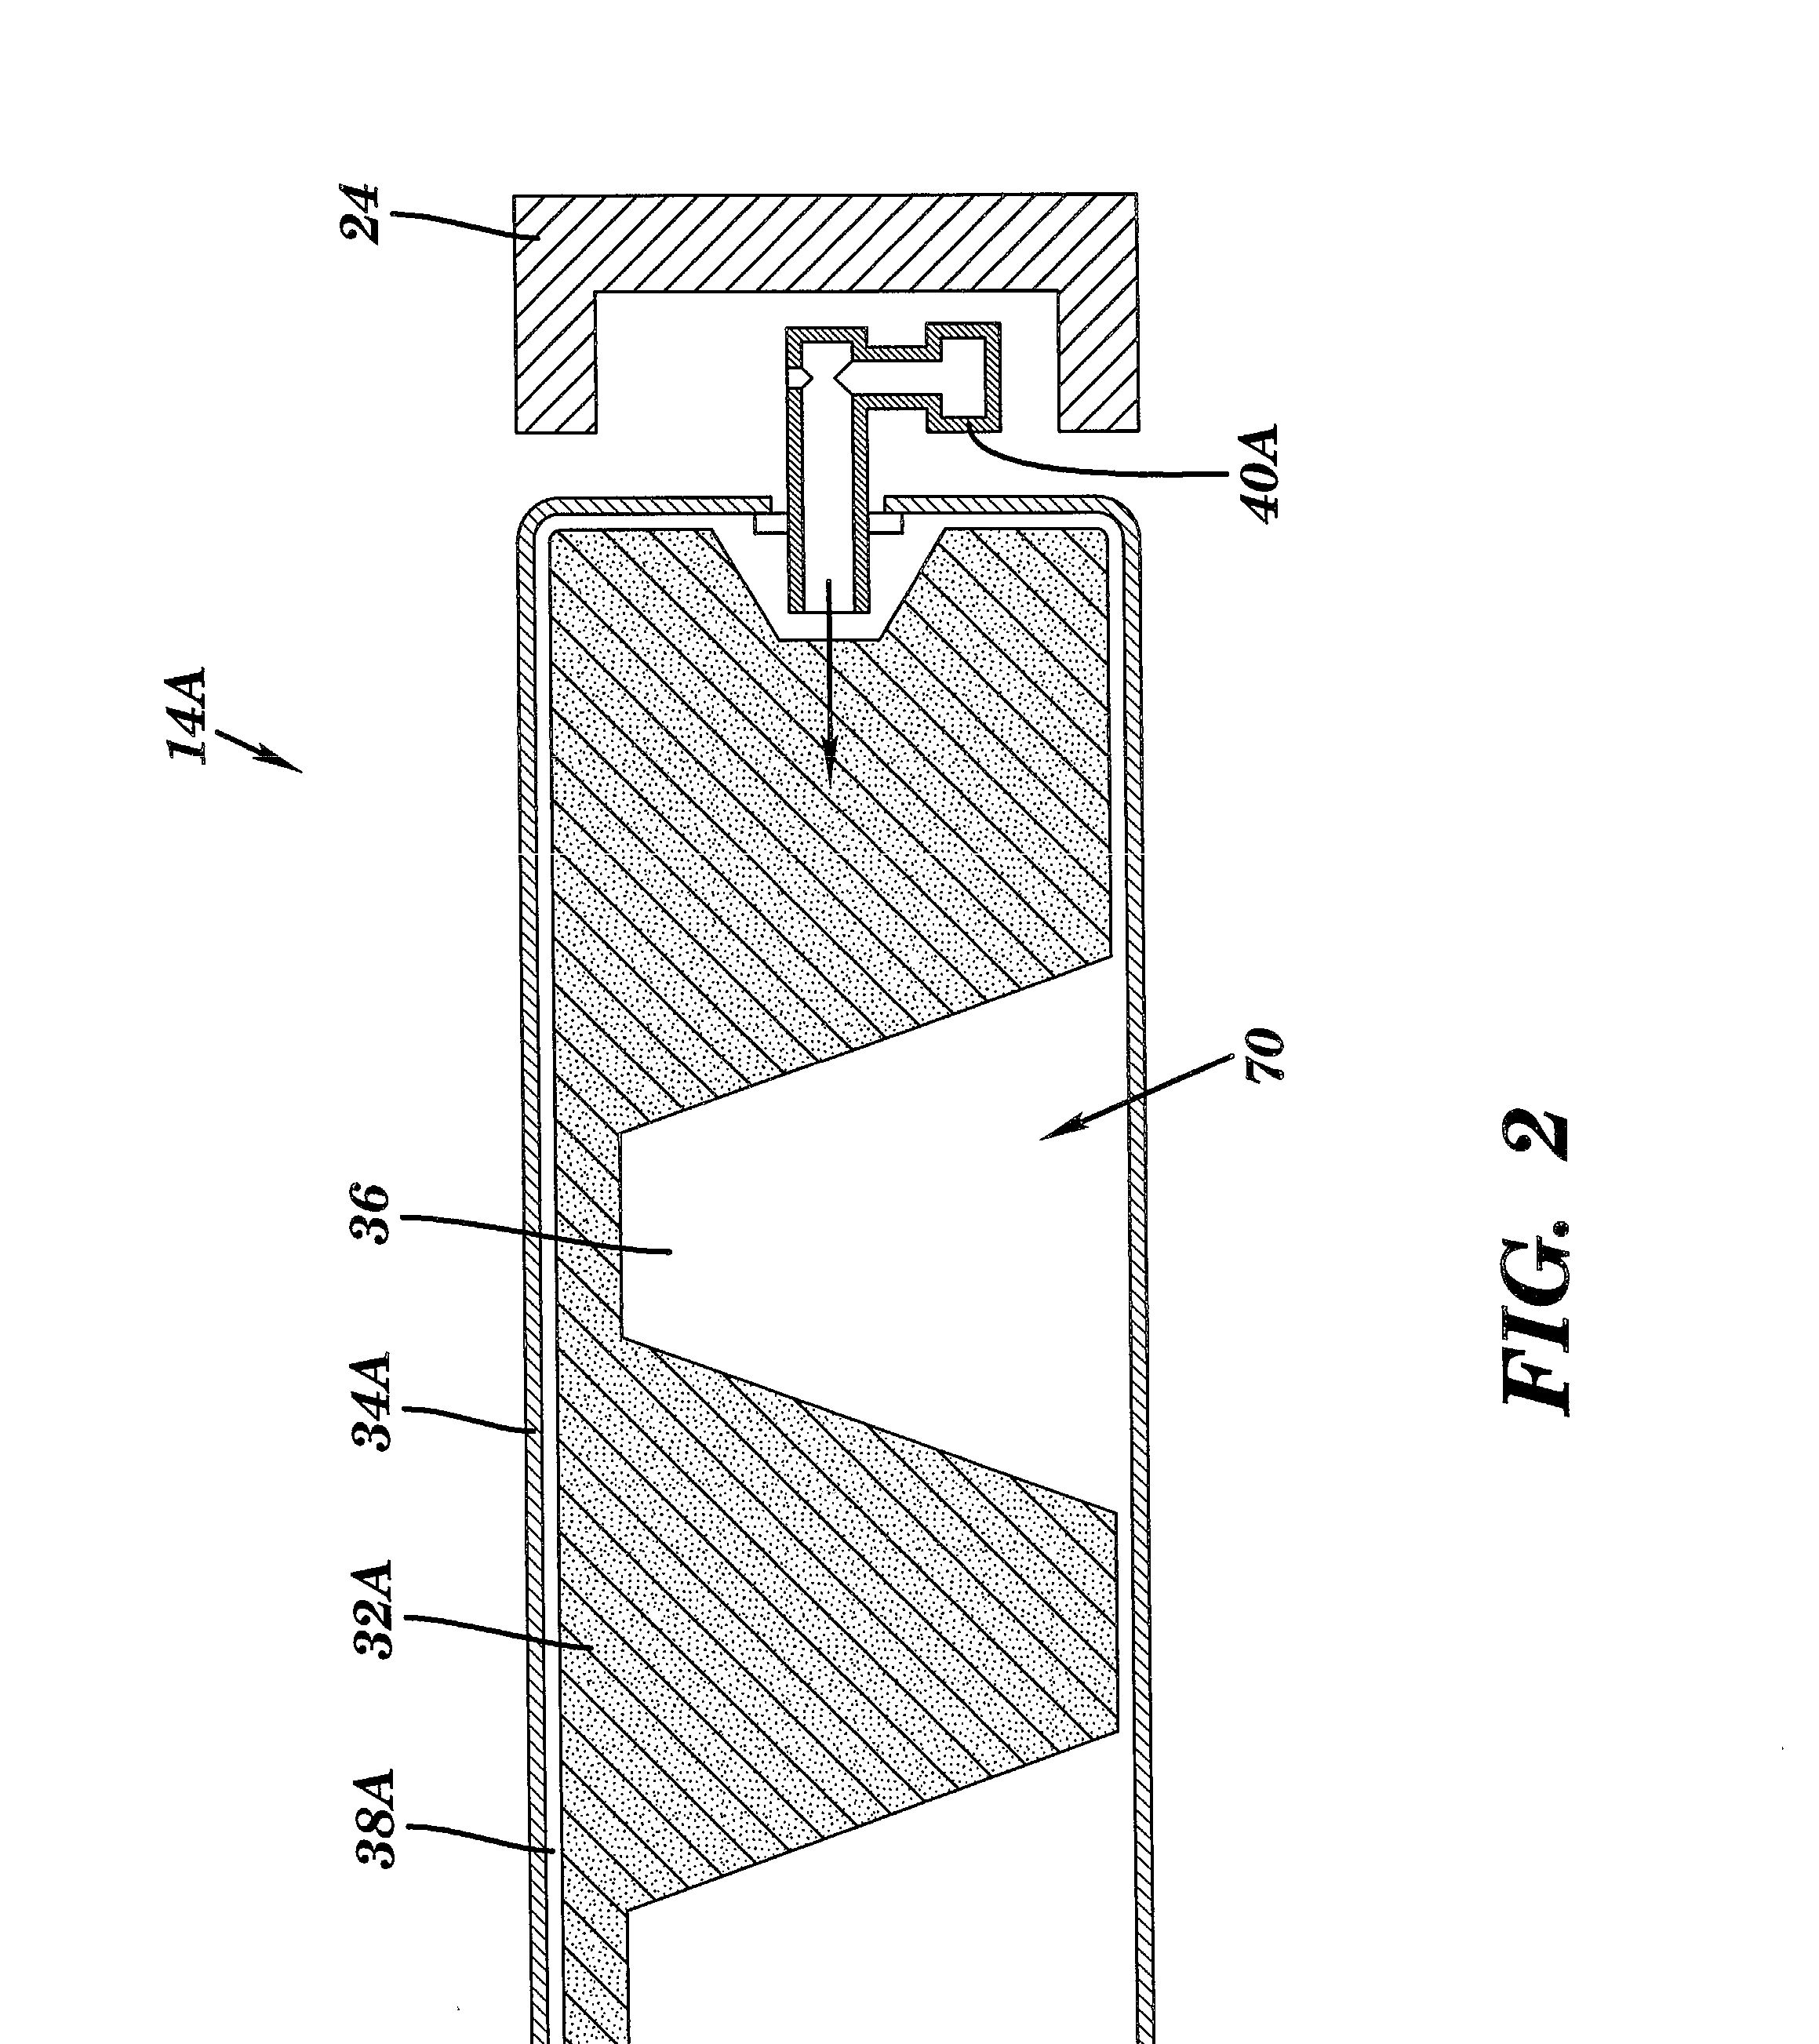 Inflatable Cushioning Device With Manifold System